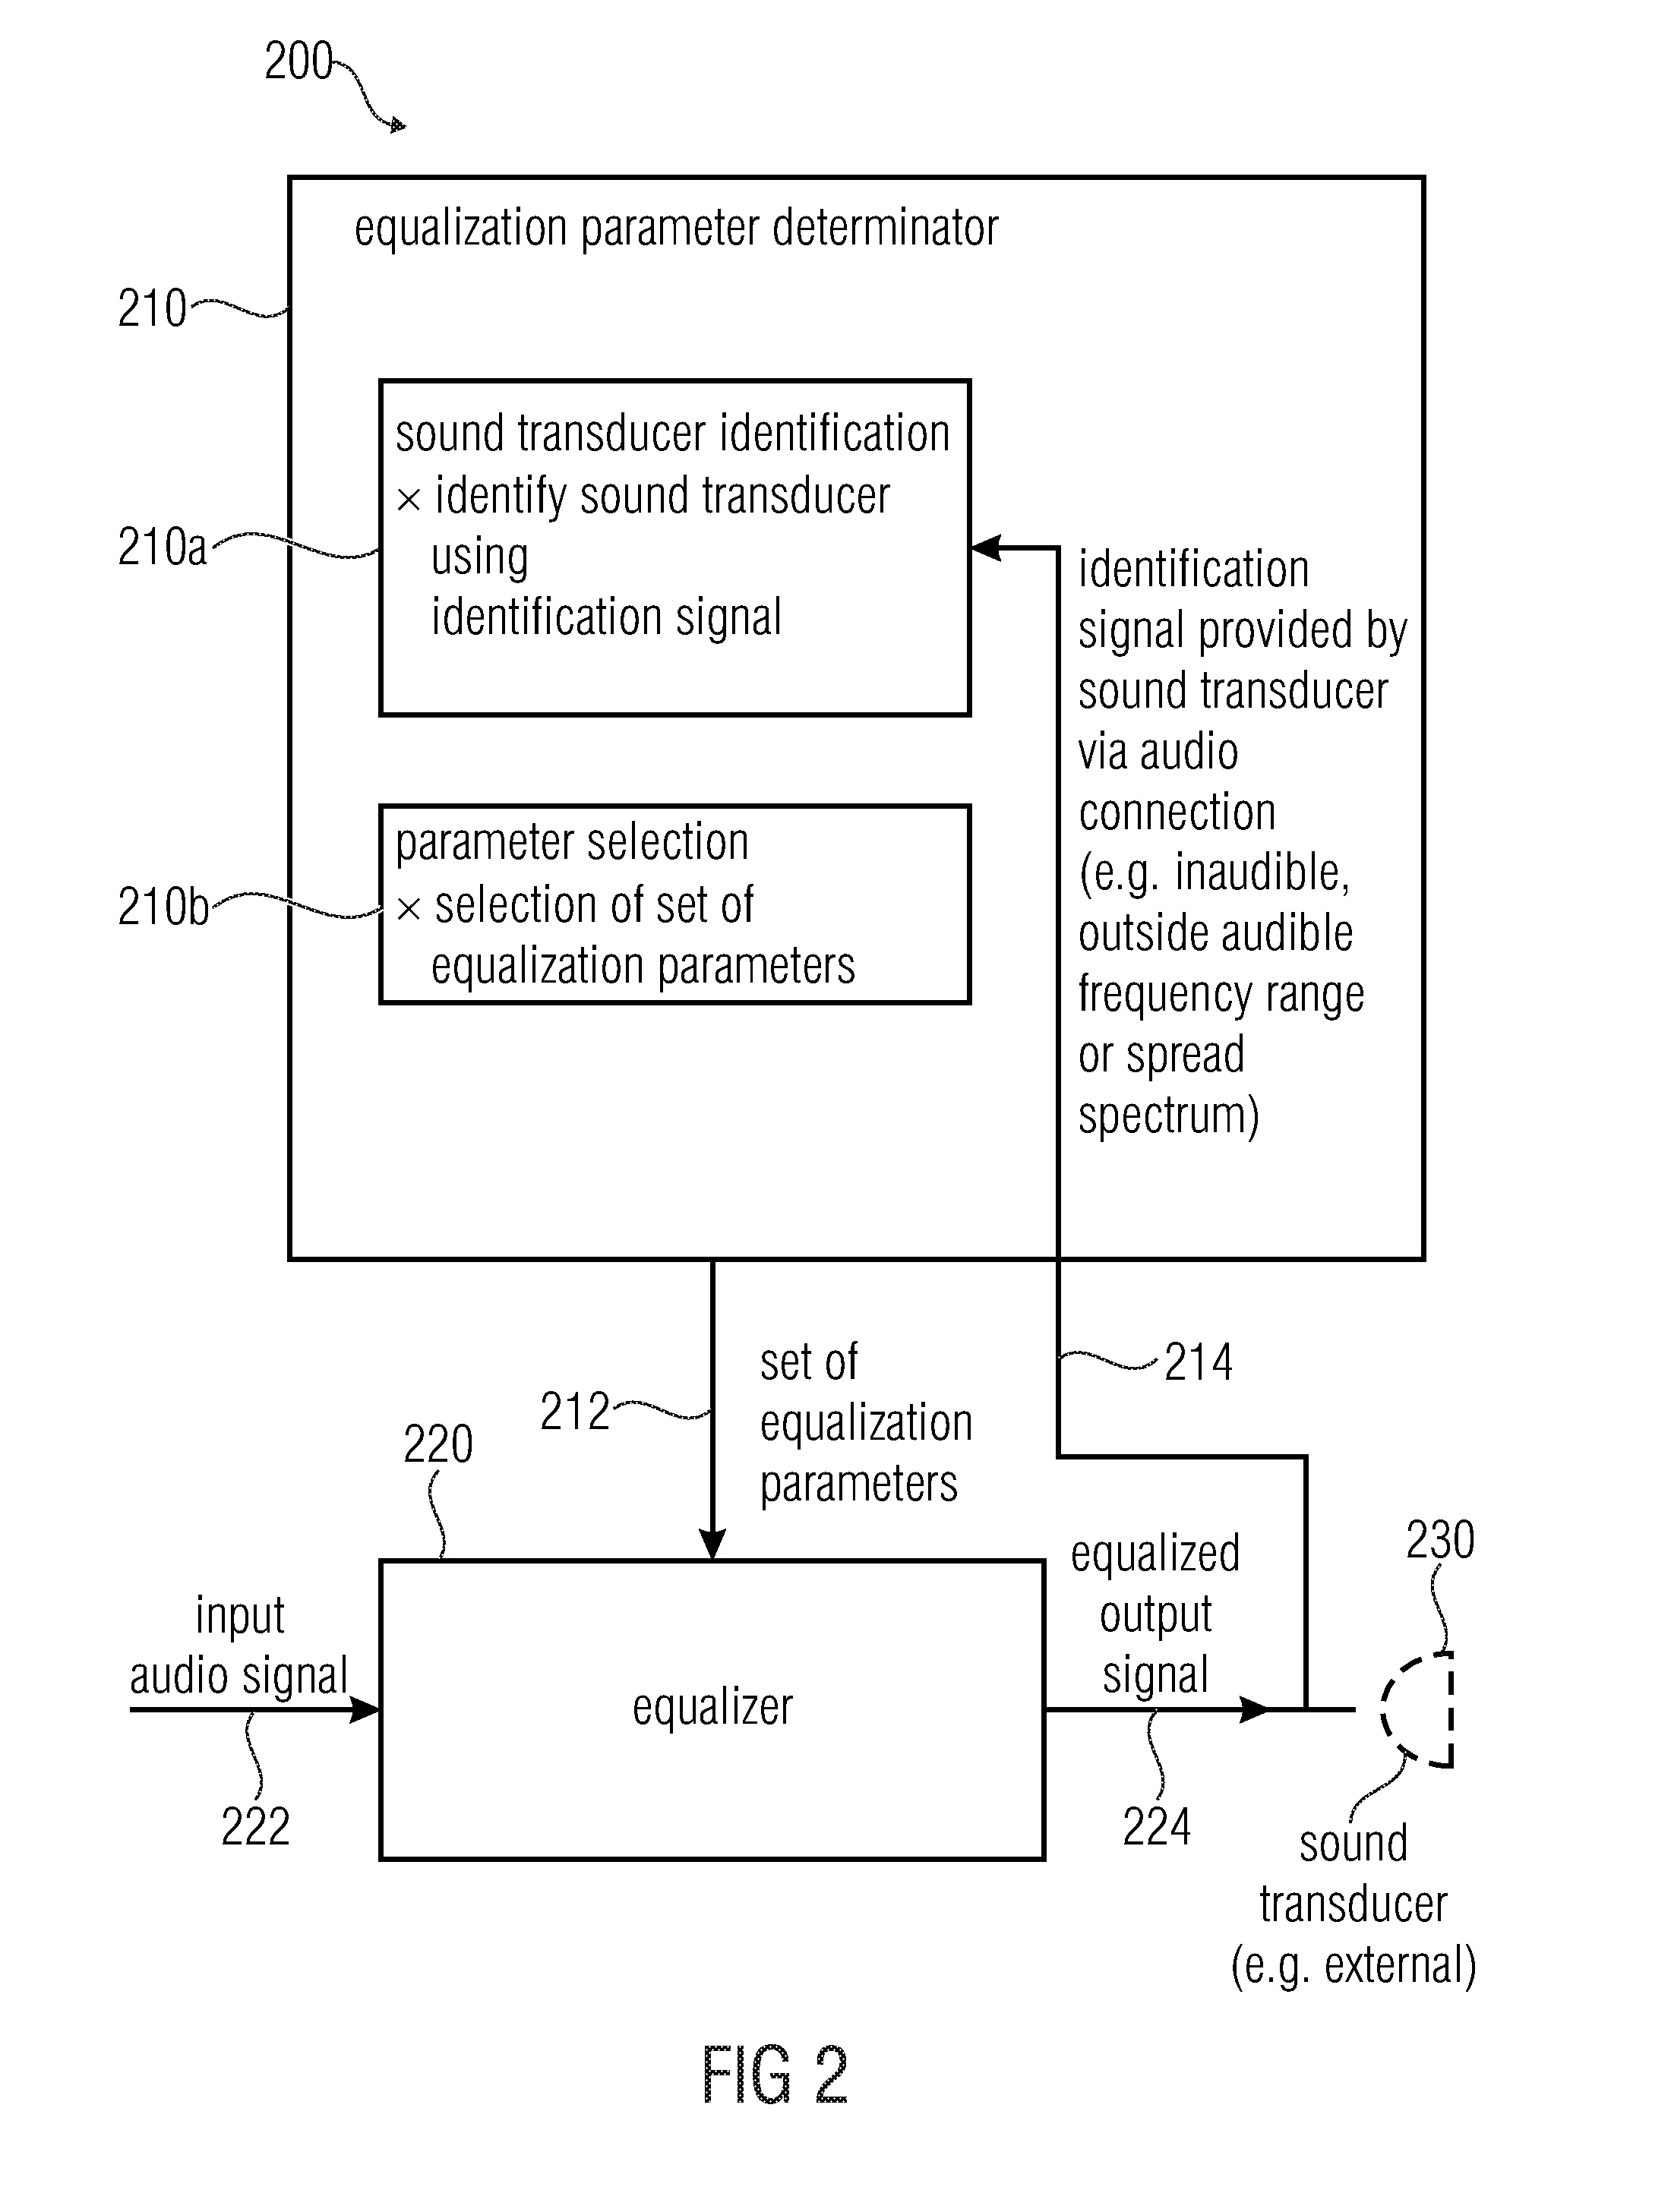 Apparatus for providing an audio signal for reproduction by a sound transducer, system, method and computer program